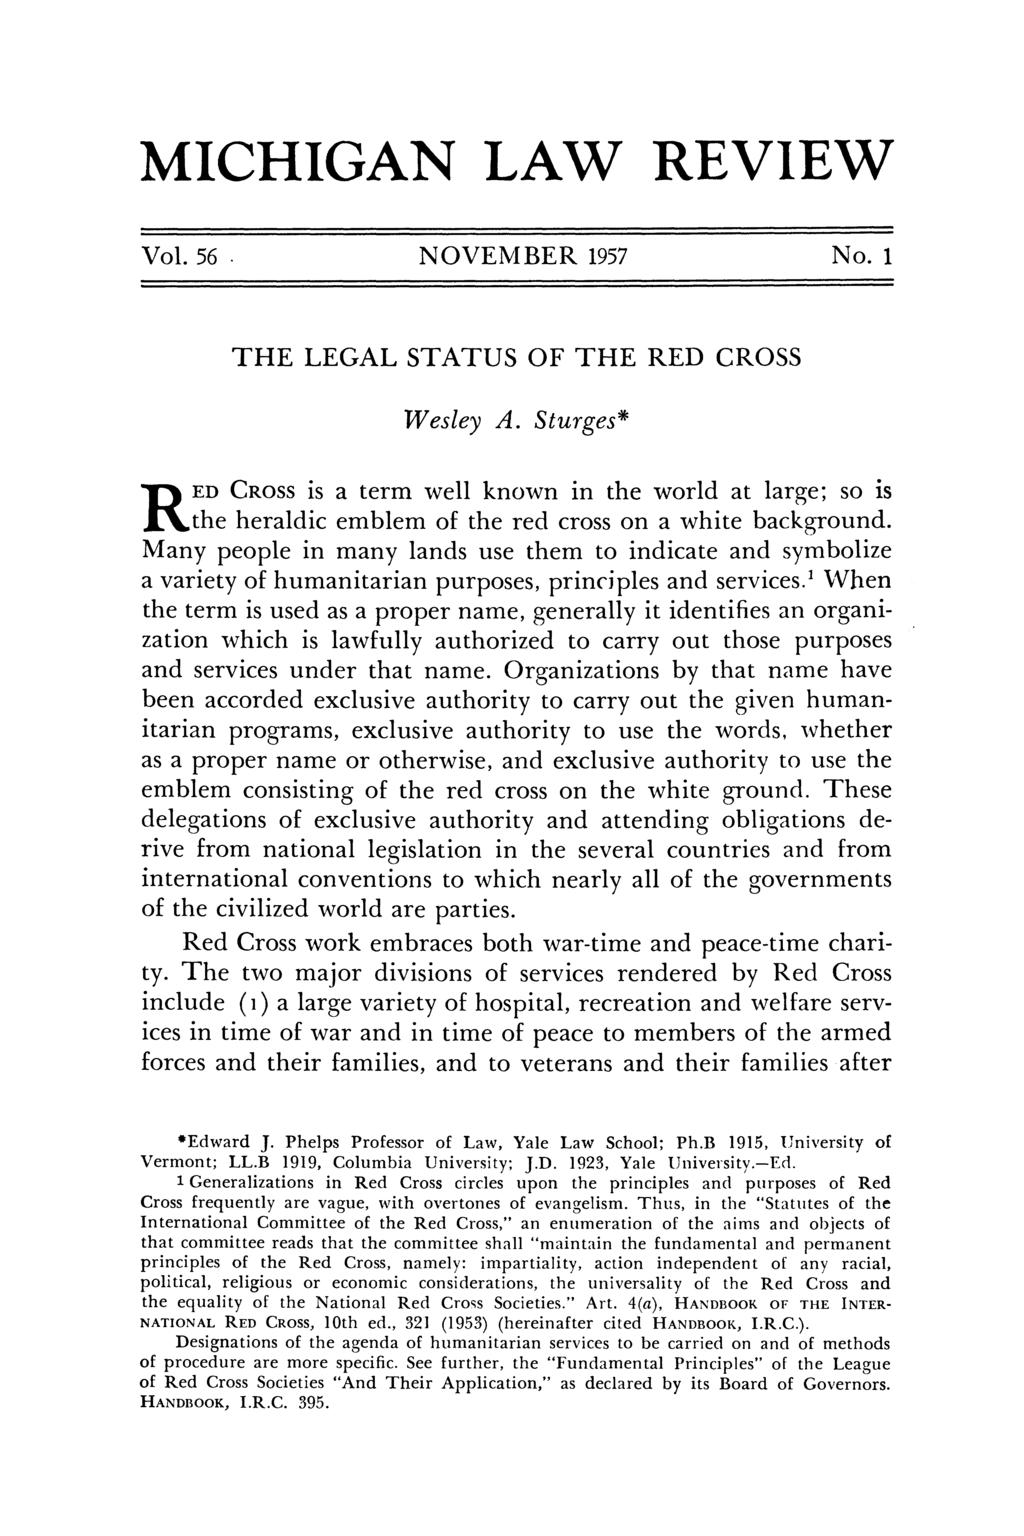 MICHIGAN LAW REVIEW Vol. 56. NOVEMBER 1957 No. 1 THE LEGAL STATUS OF THE RED CROSS Wesley A.